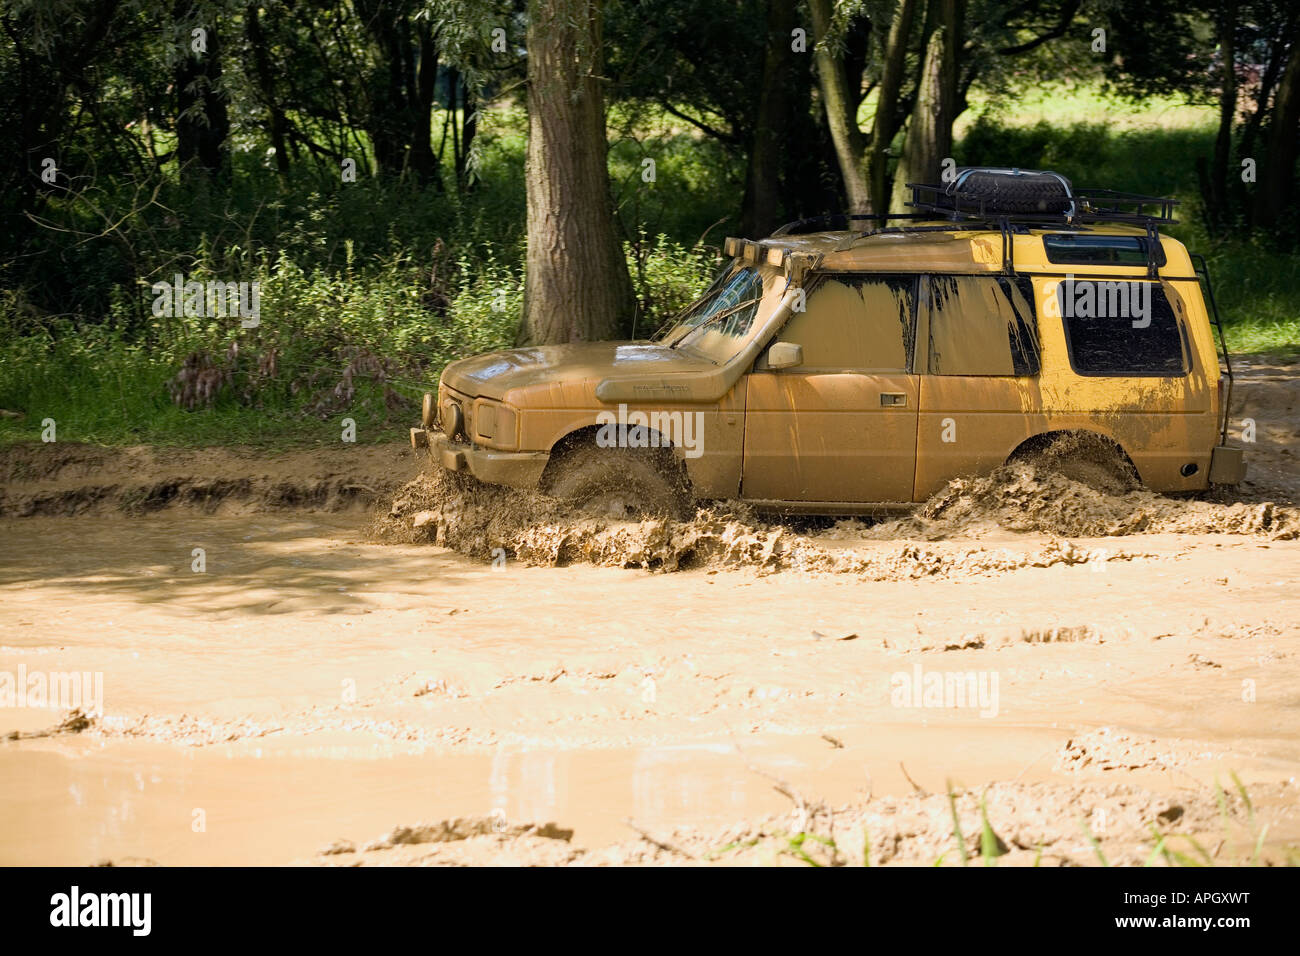 Landrover Discovery going through deep mud Stock Photo